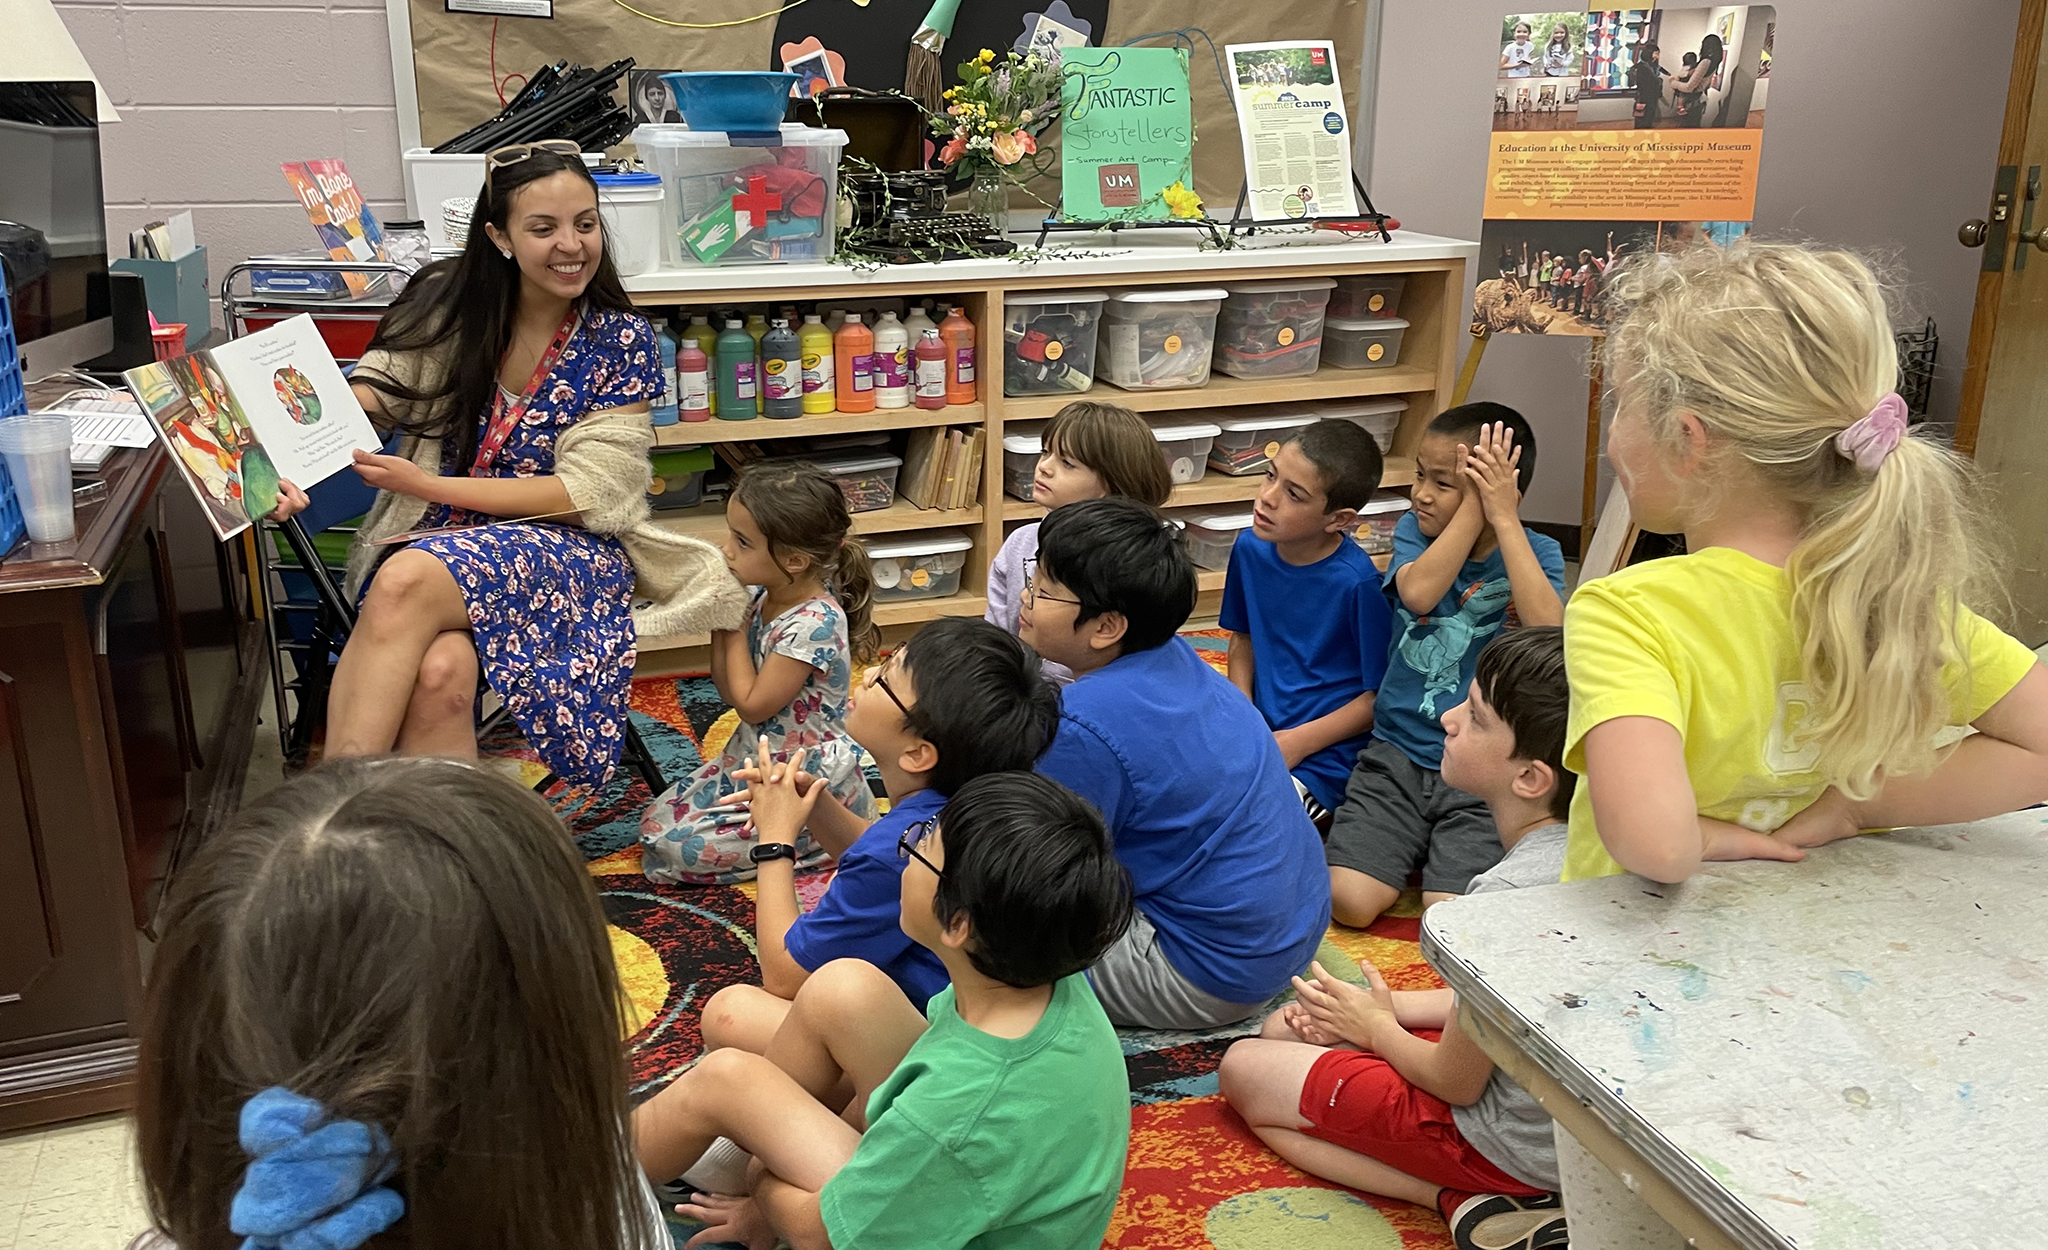 Rosa Salas Gonzalez (left), museum educator at the University of Mississippi Museum, reads to students during the recent Fantastic Storytellers camp, in which children grades 1-5 learned how to tell and illustrate a compelling story. The museum is offering several more camps throughout the summer. Submitted photo